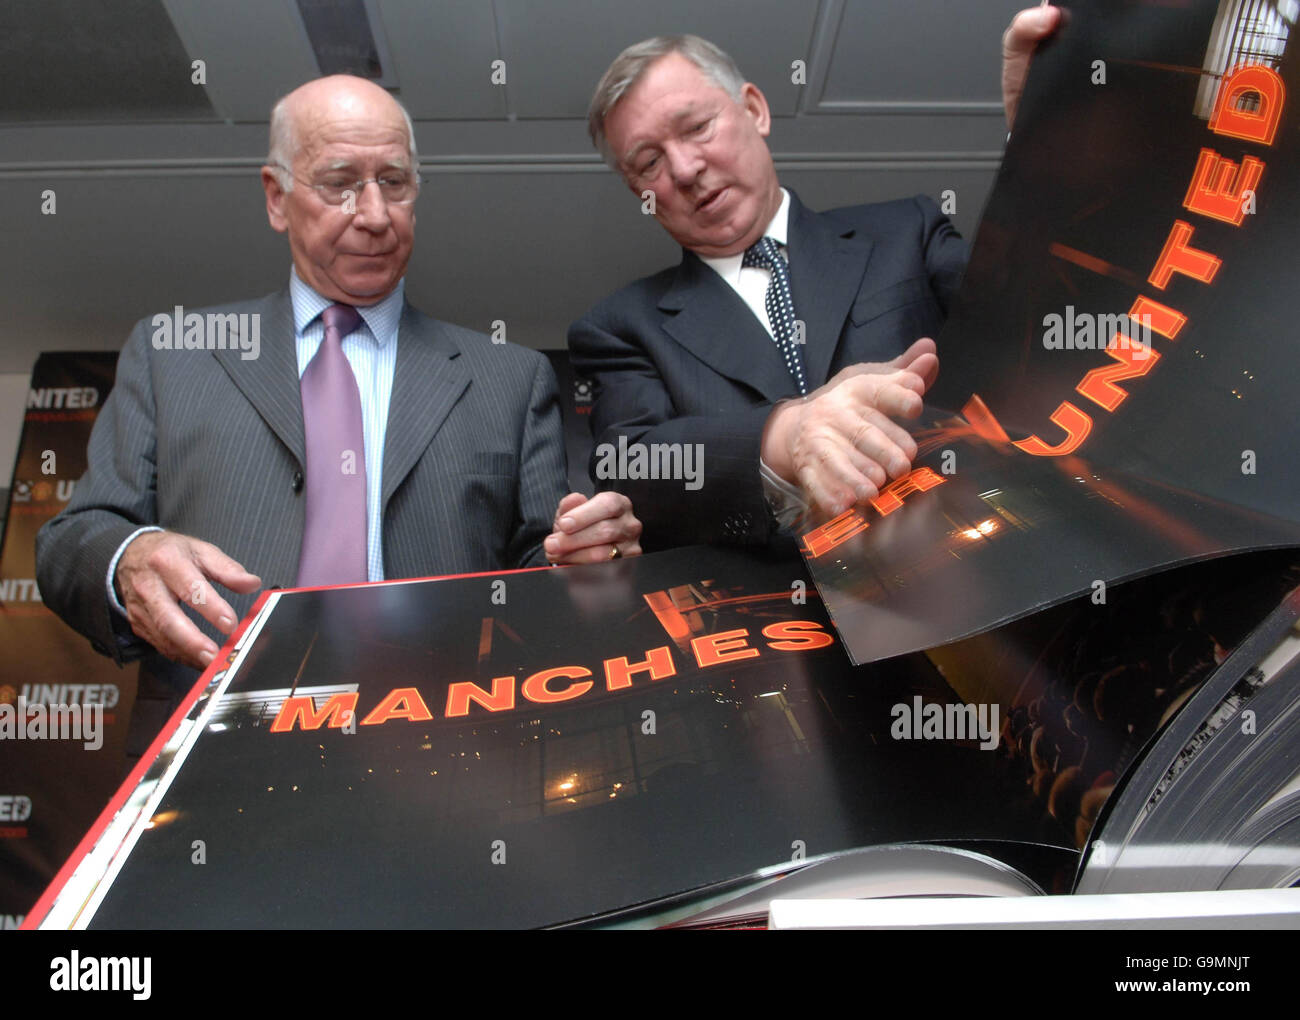 Sir Bobby Charlton and Sir Alex Ferguson turn the pages of the 'Manchester United Opus', a book measuring half a metre square and weighing 37 kilograms depicting the life of the famous football club. Stock Photo